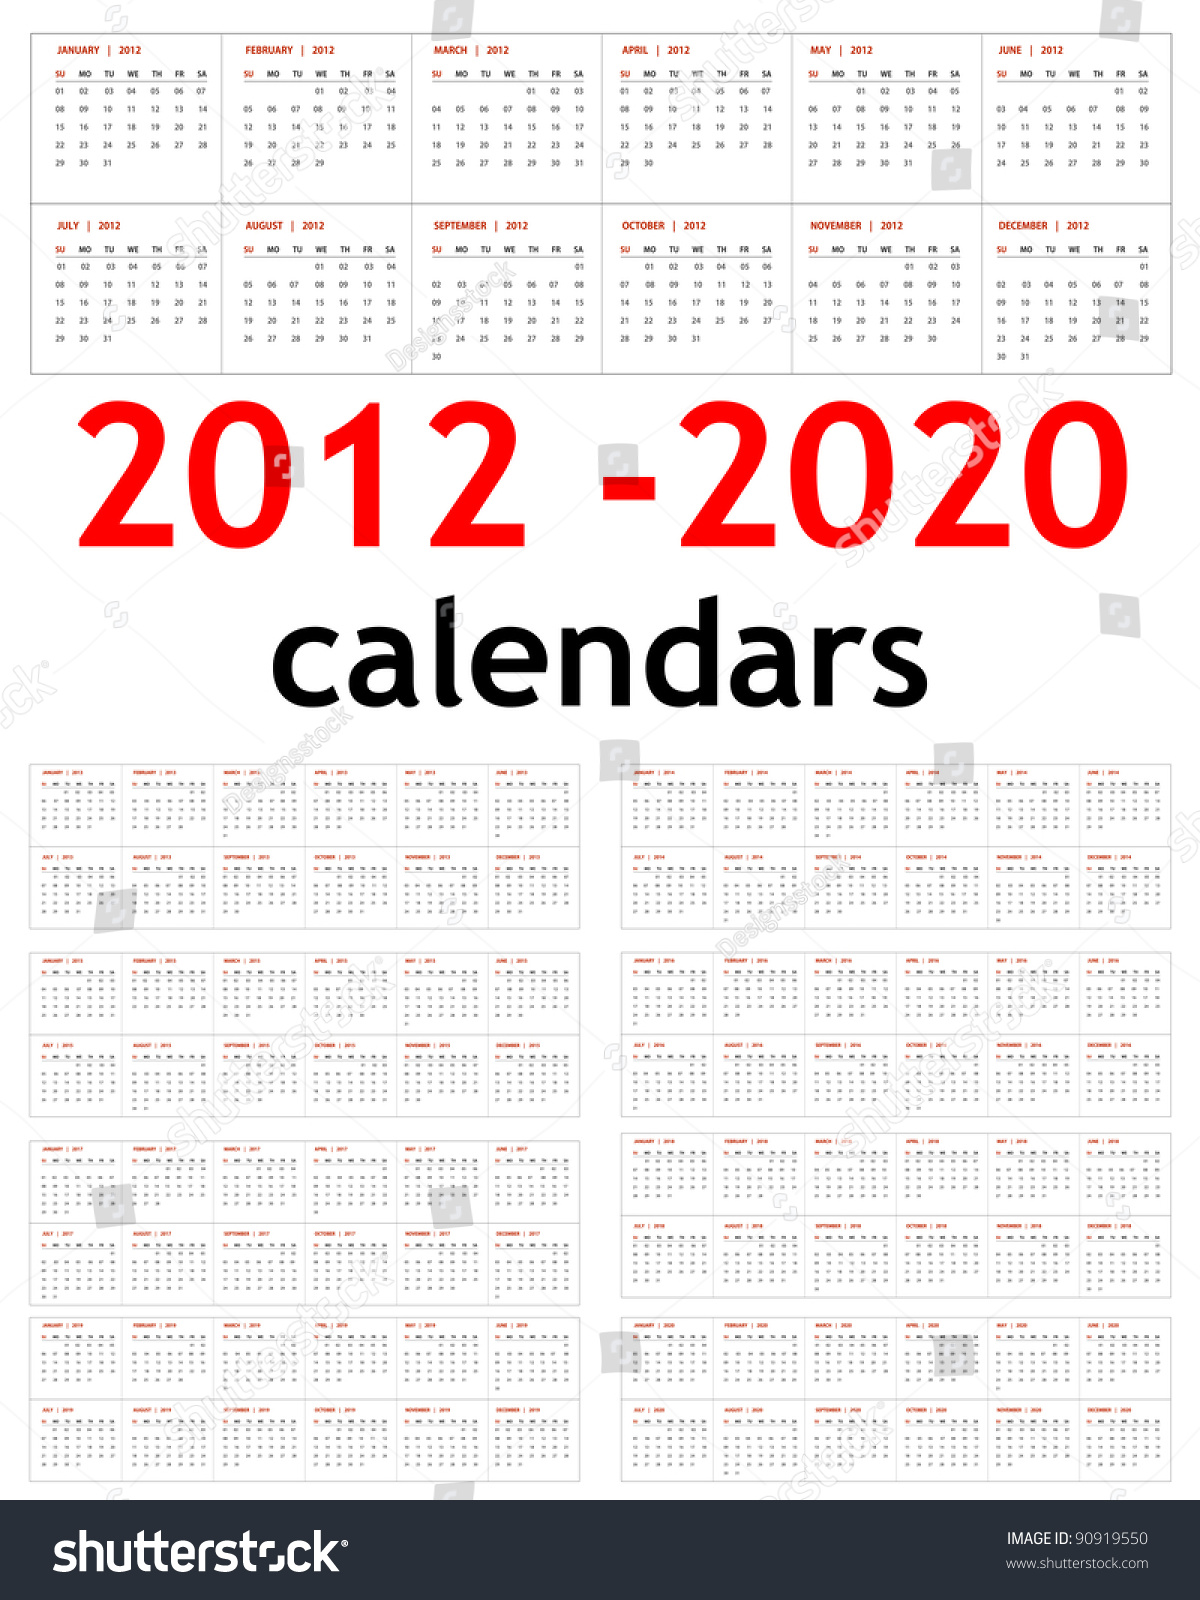 calendars 2014 and 2015